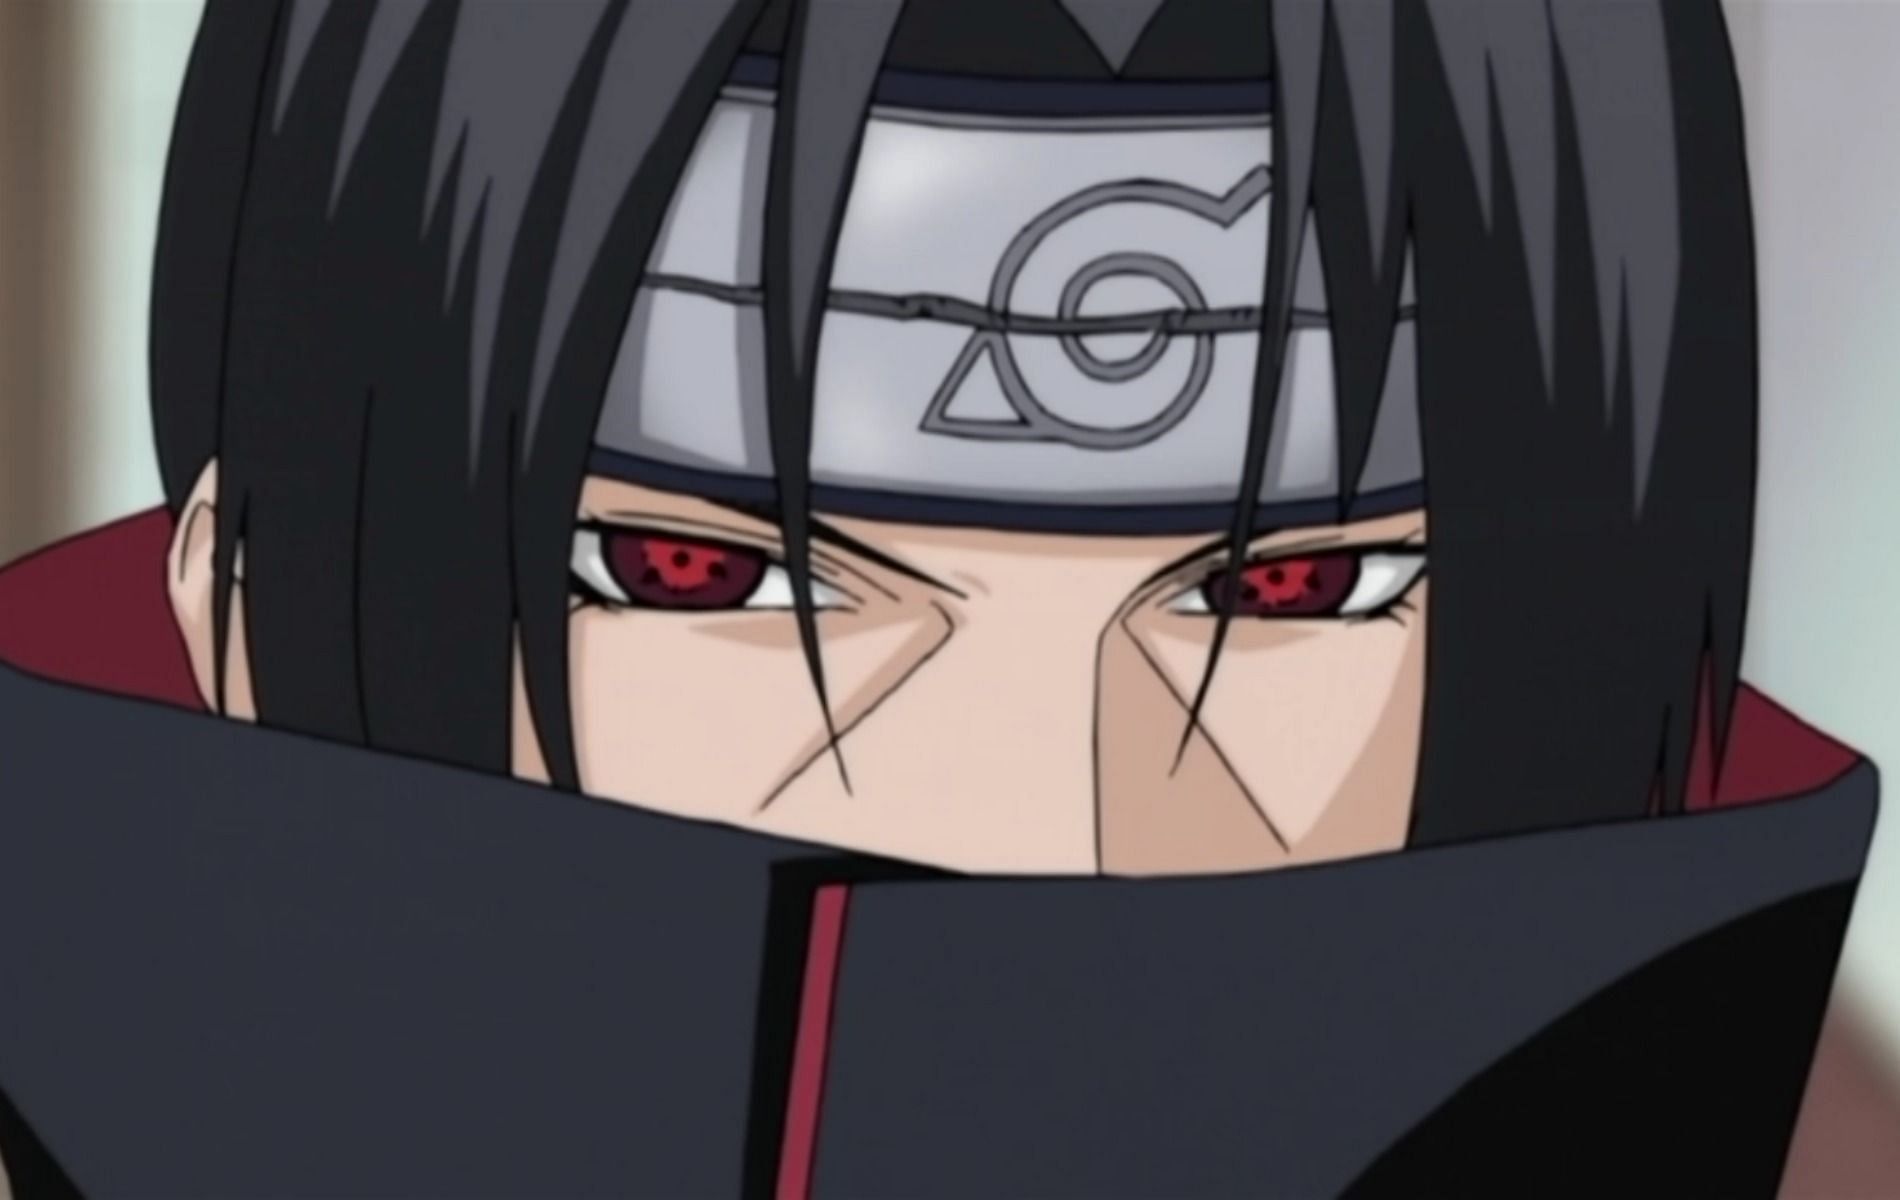 Itachi loved to observe people from a distance (Image via Naruto)